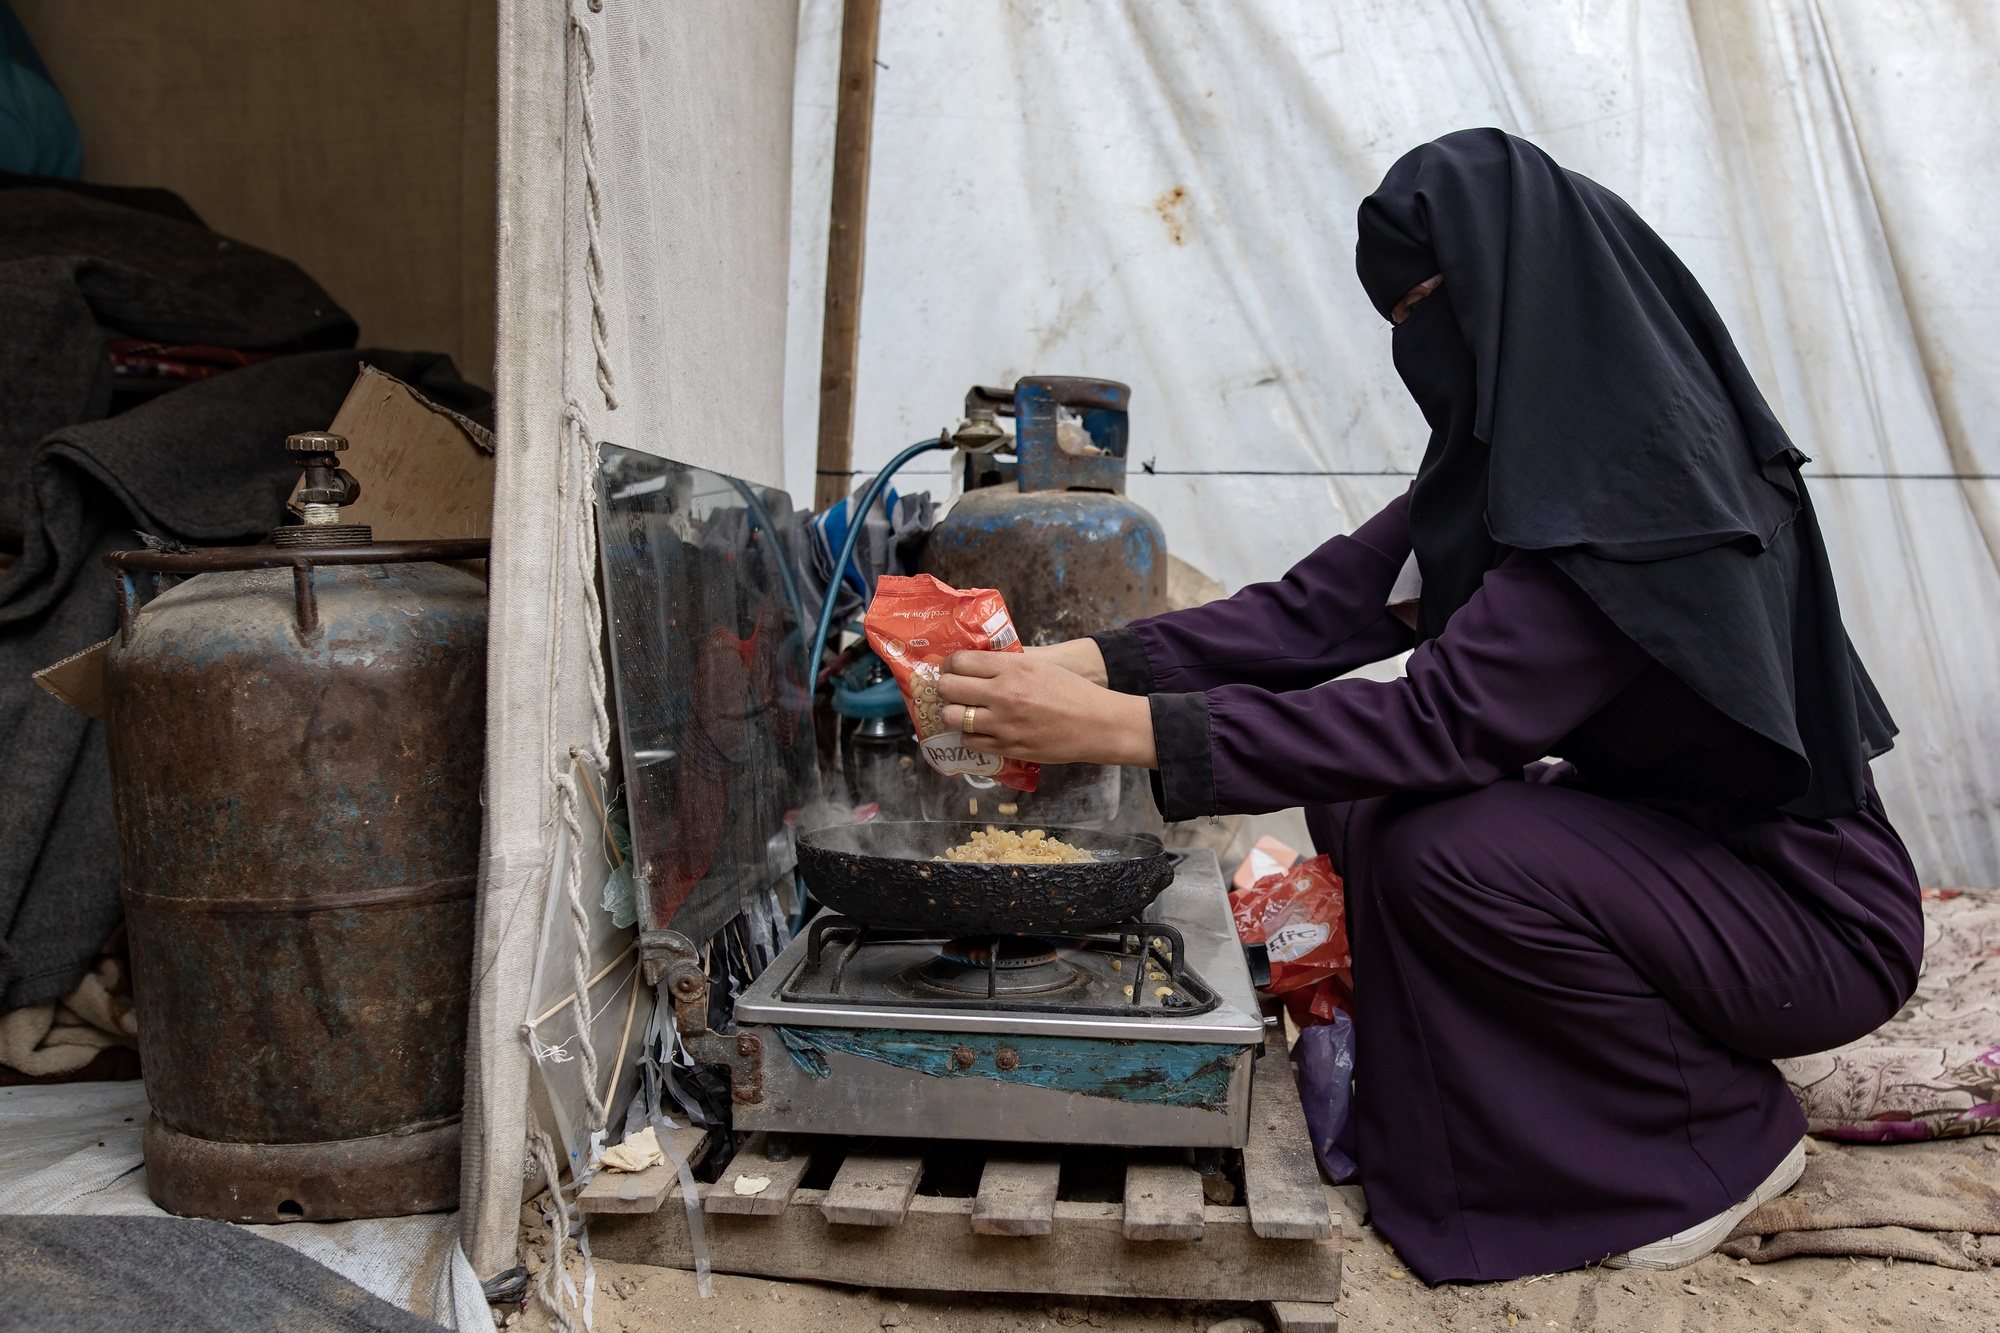 epa11235176 Internally displaced Palestinian Hanan Al-Shafi&#039;i &#039;Umm Adl&#039;, 30, a mother to nine children, cooks on a stove, at their shelter in Khan Yunis, southern Gaza Strip, 21 March 2024. Hanan said that she and her children have been displaced twice within Khan Yunis since the outbreak of the conflict. With no access to fresh water, her children walk long distances to fetch water to meet their daily needs of 40 liters of clean water for drinking and cooking and 70 liters for washing and personal hygiene. According to the United Nations, the majority of people in the Gaza Strip face dire water and sanitation conditions as WASH (water, sanitation, hygiene) facilities that provide basic services have been damaged or destroyed. Since 07 October 2023, up to 1.9 million people have been displaced throughout the Gaza Strip, according to UNRWA, which added that most civilians in Gaza are in &#039;desperate need of humanitarian assistance and protection&#039;. World Water Day, which is held annually on 22 March, focuses on the importance of global access to safe and clean water. This year&#039;s theme is &#039;Leveraging Water for Peace&#039;.  EPA/HAITHAM IMAD